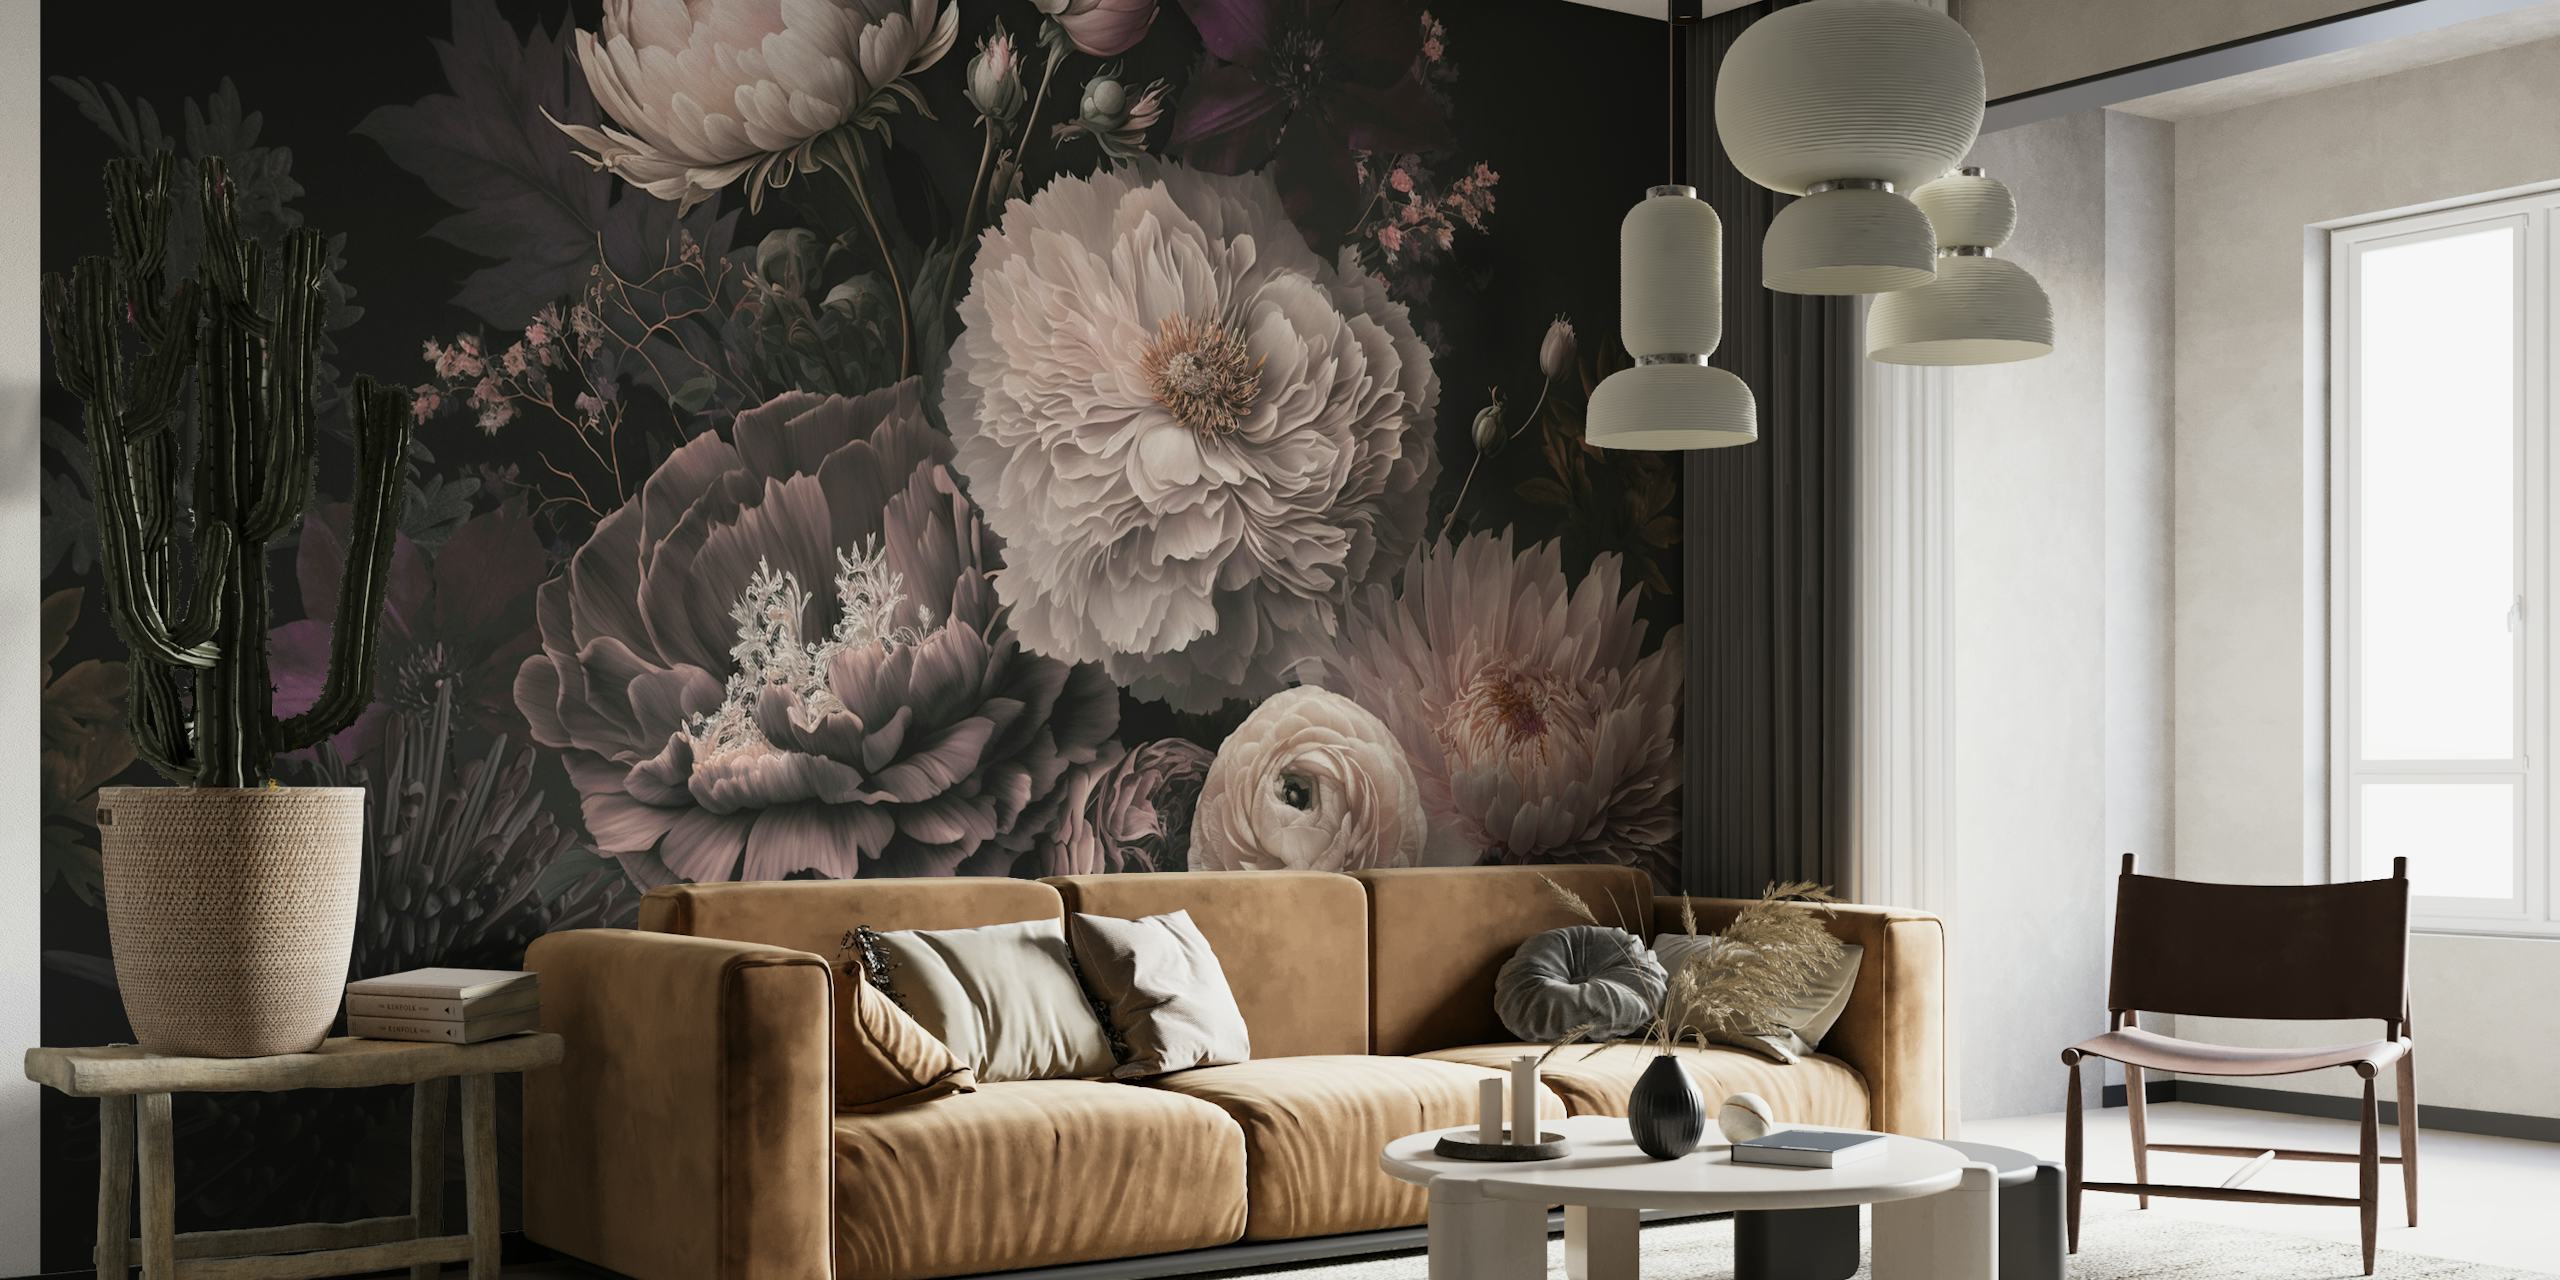 Gothic flower wallpaper representing the Moody Flowers Gothic Vibe design